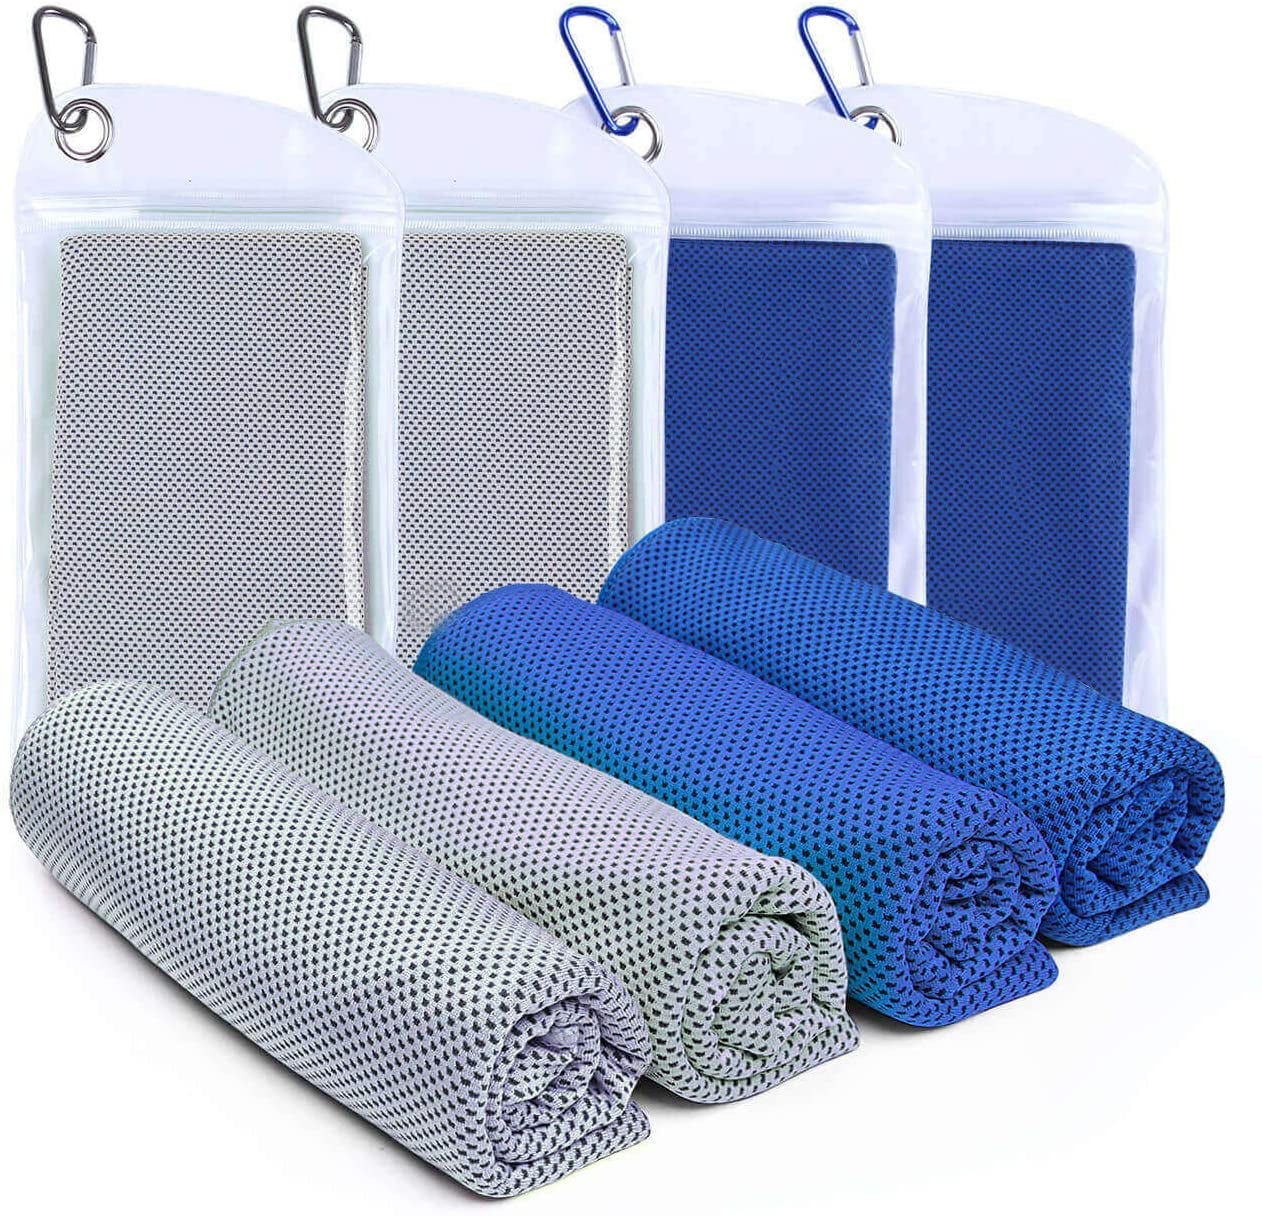 Cooling Towel 40x12 ,Ice Towel,Soft Breathable Chilly Towel,Microfiber Towel for Yoga,Sport,Running,Gym,Workout,Camping,Fitness,Workout & More Activities 4 Pack 